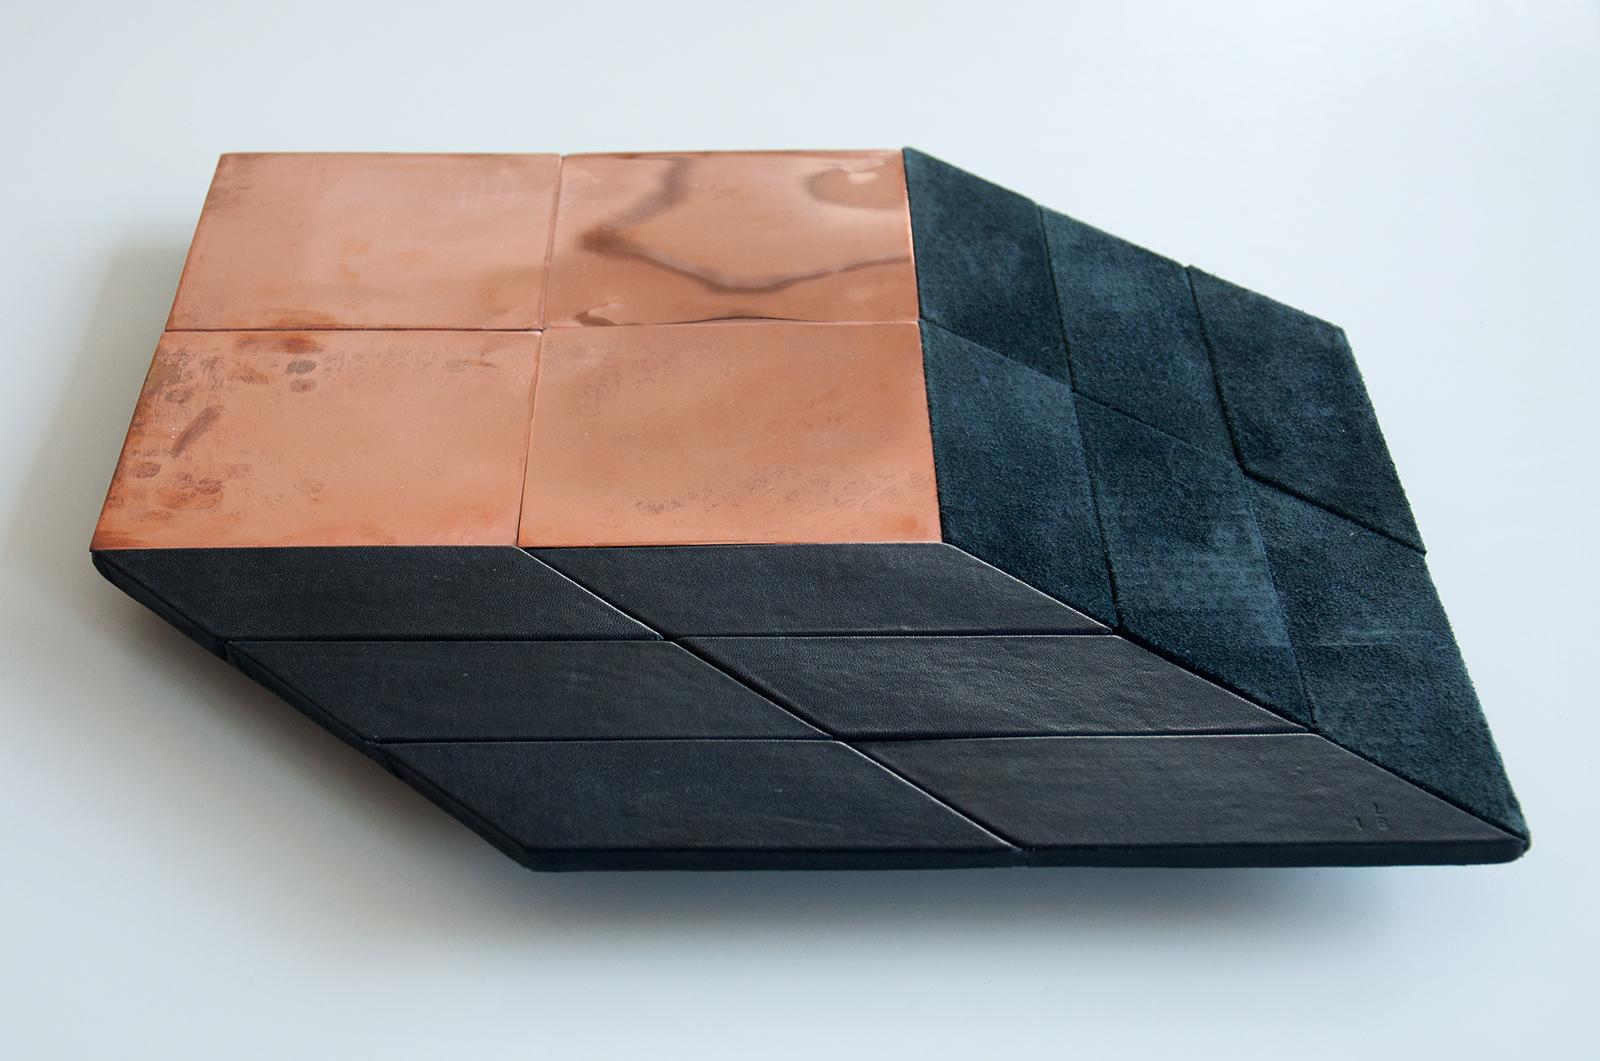 Brazilian Miriam Loellmann, Contemporary Cube, one-of-a-kind piece, polished copper, leather